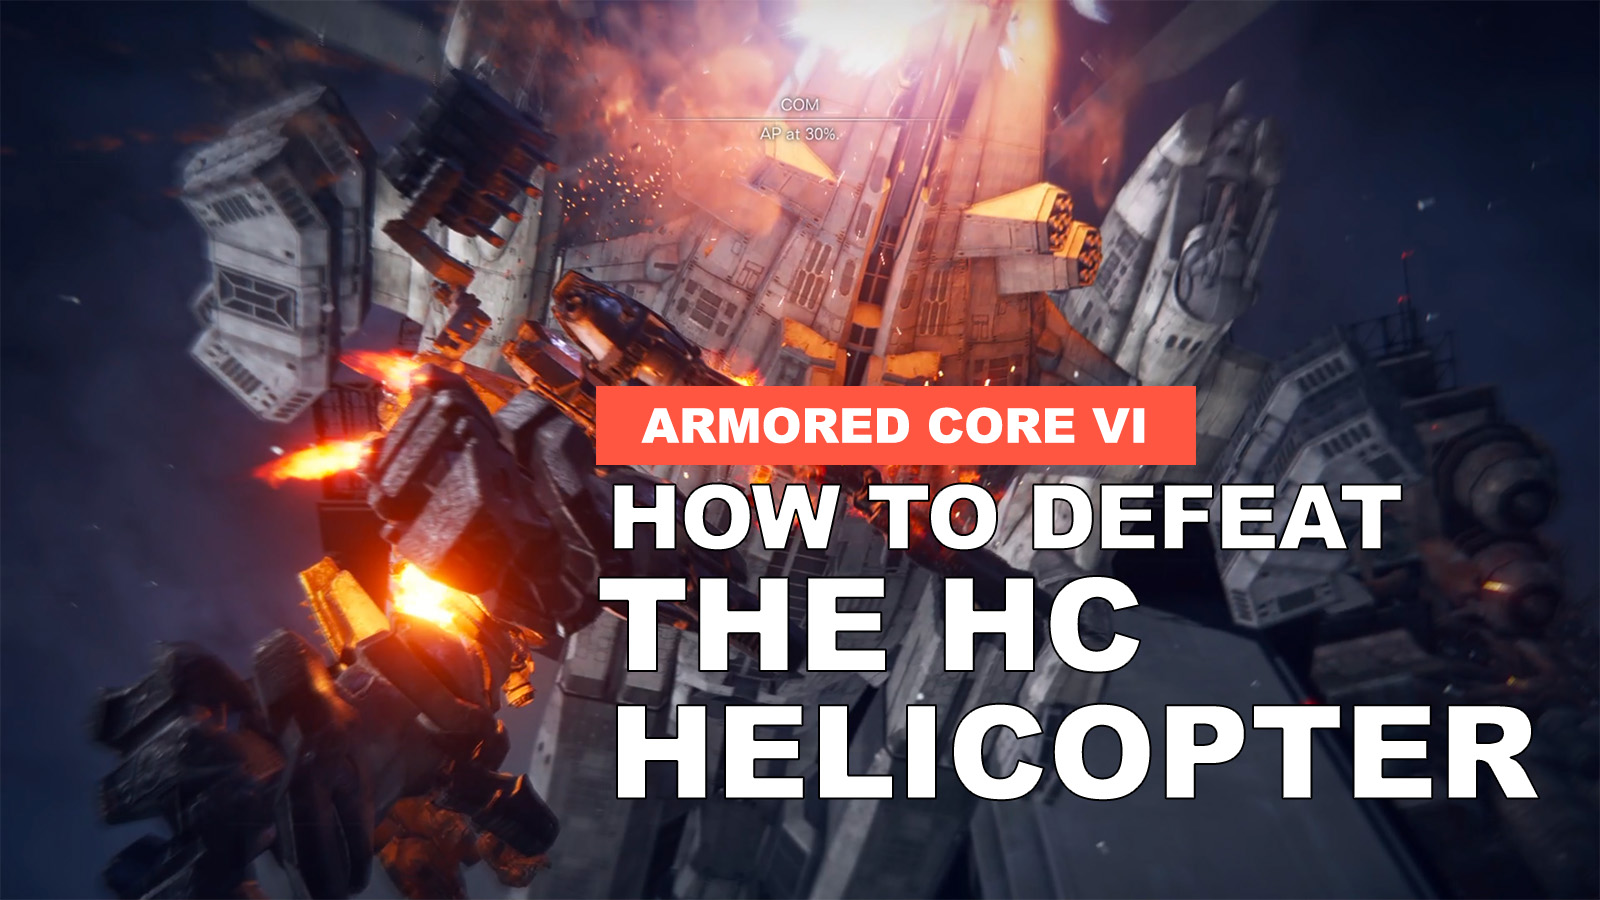 How To Defeat HC Helicopter In Armored Core VI